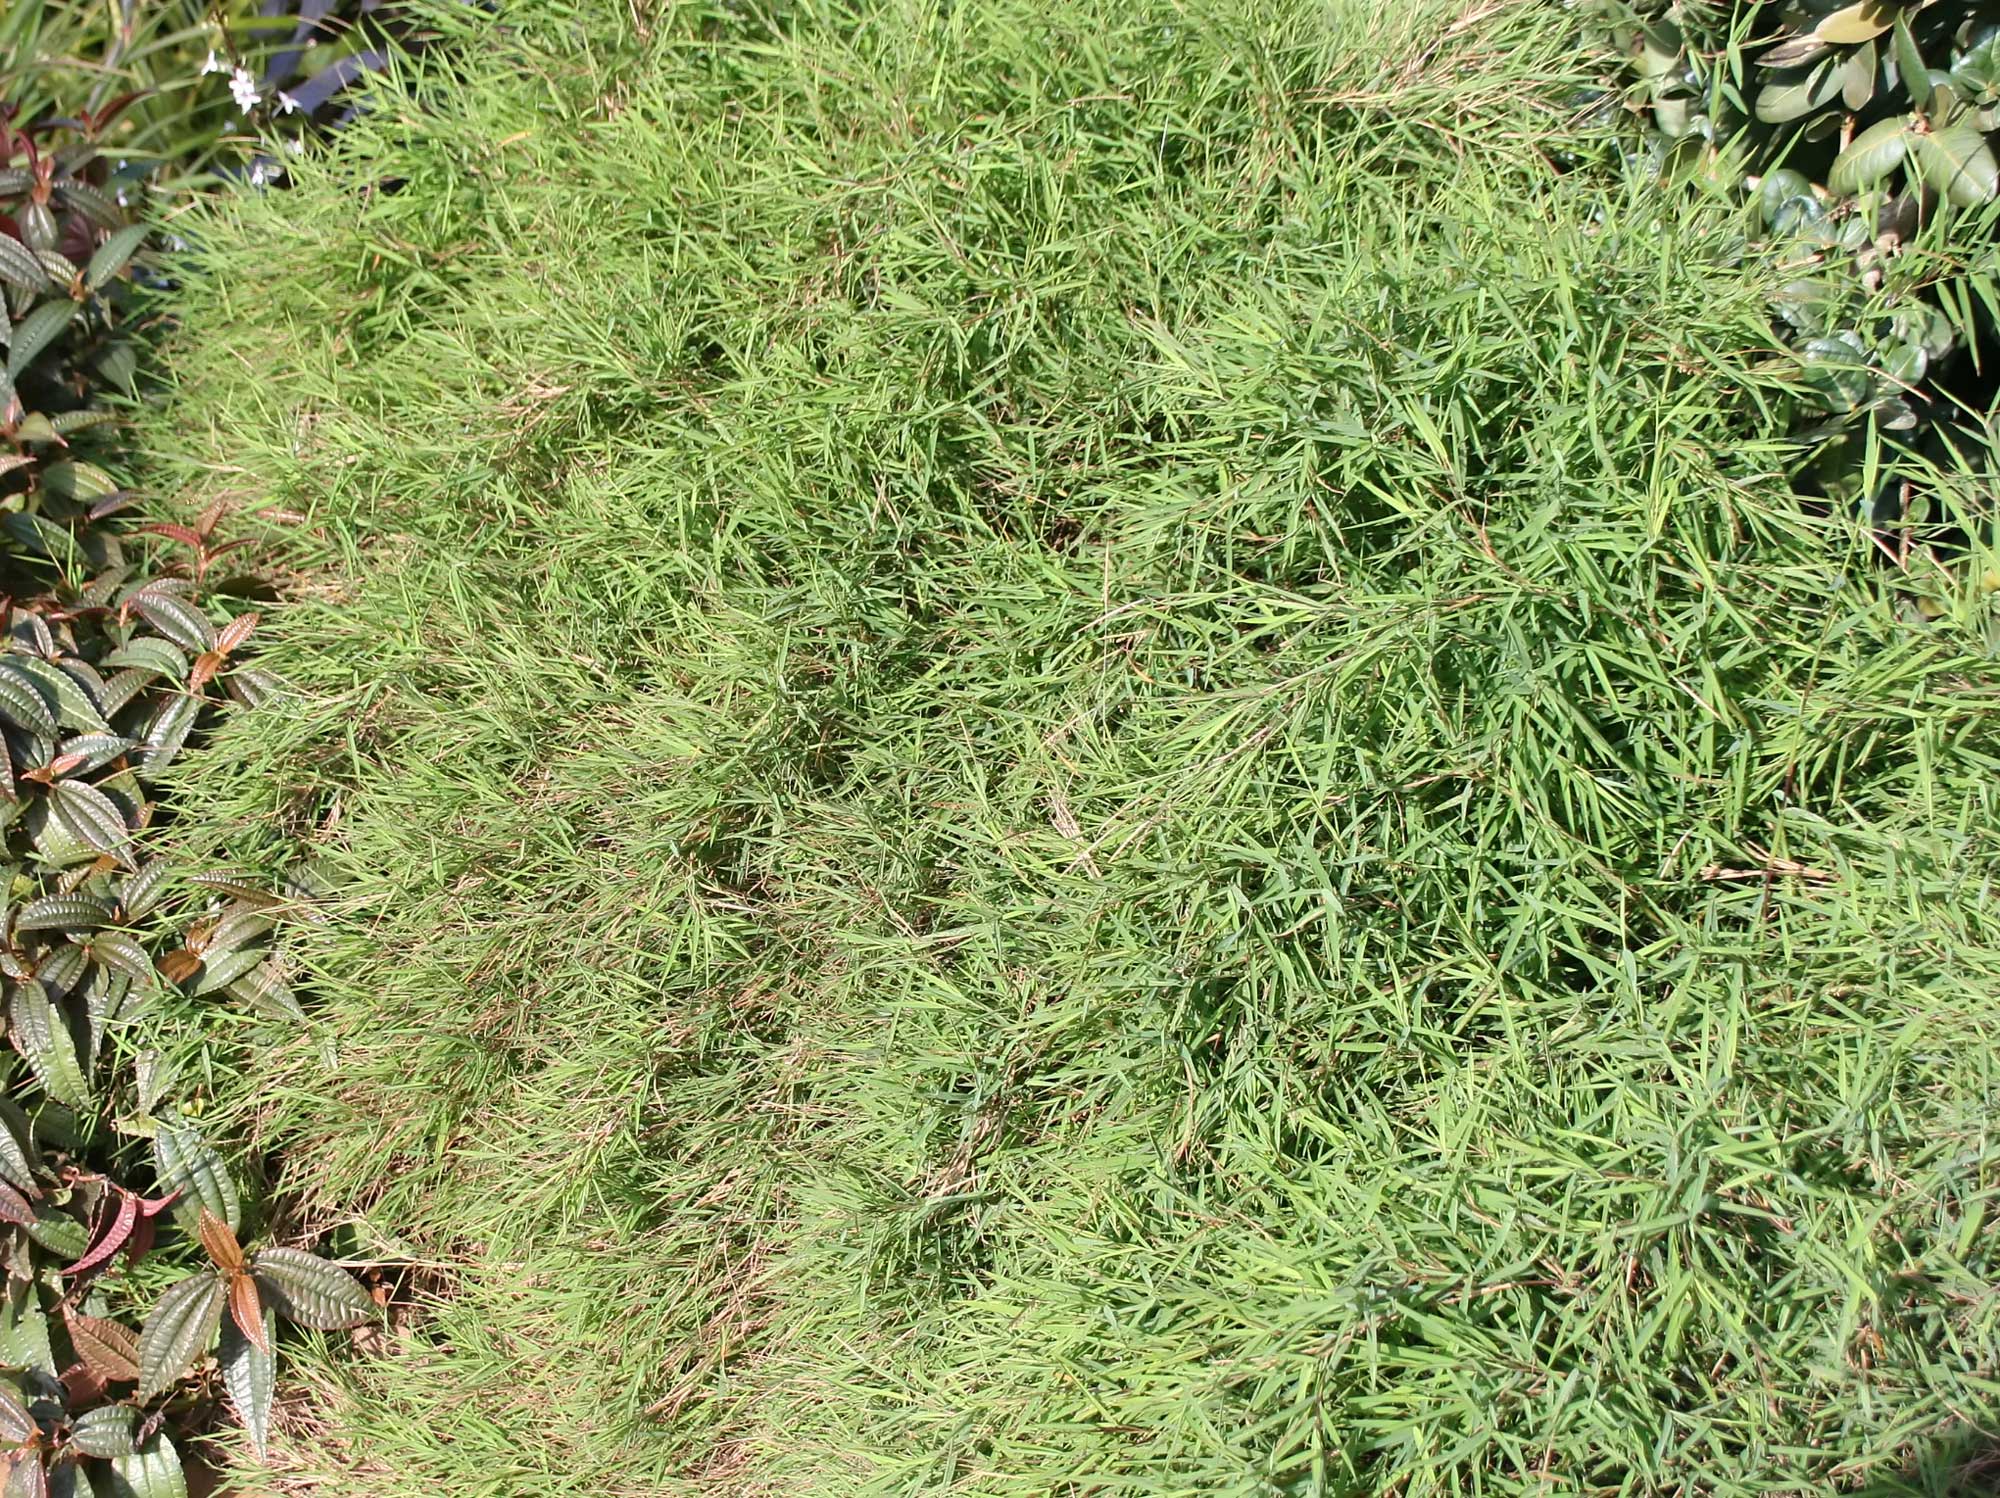 Photograph of cultivated baby bamboo. The photo shows a clump of low-growing grass with short, spiky-looking leaves.